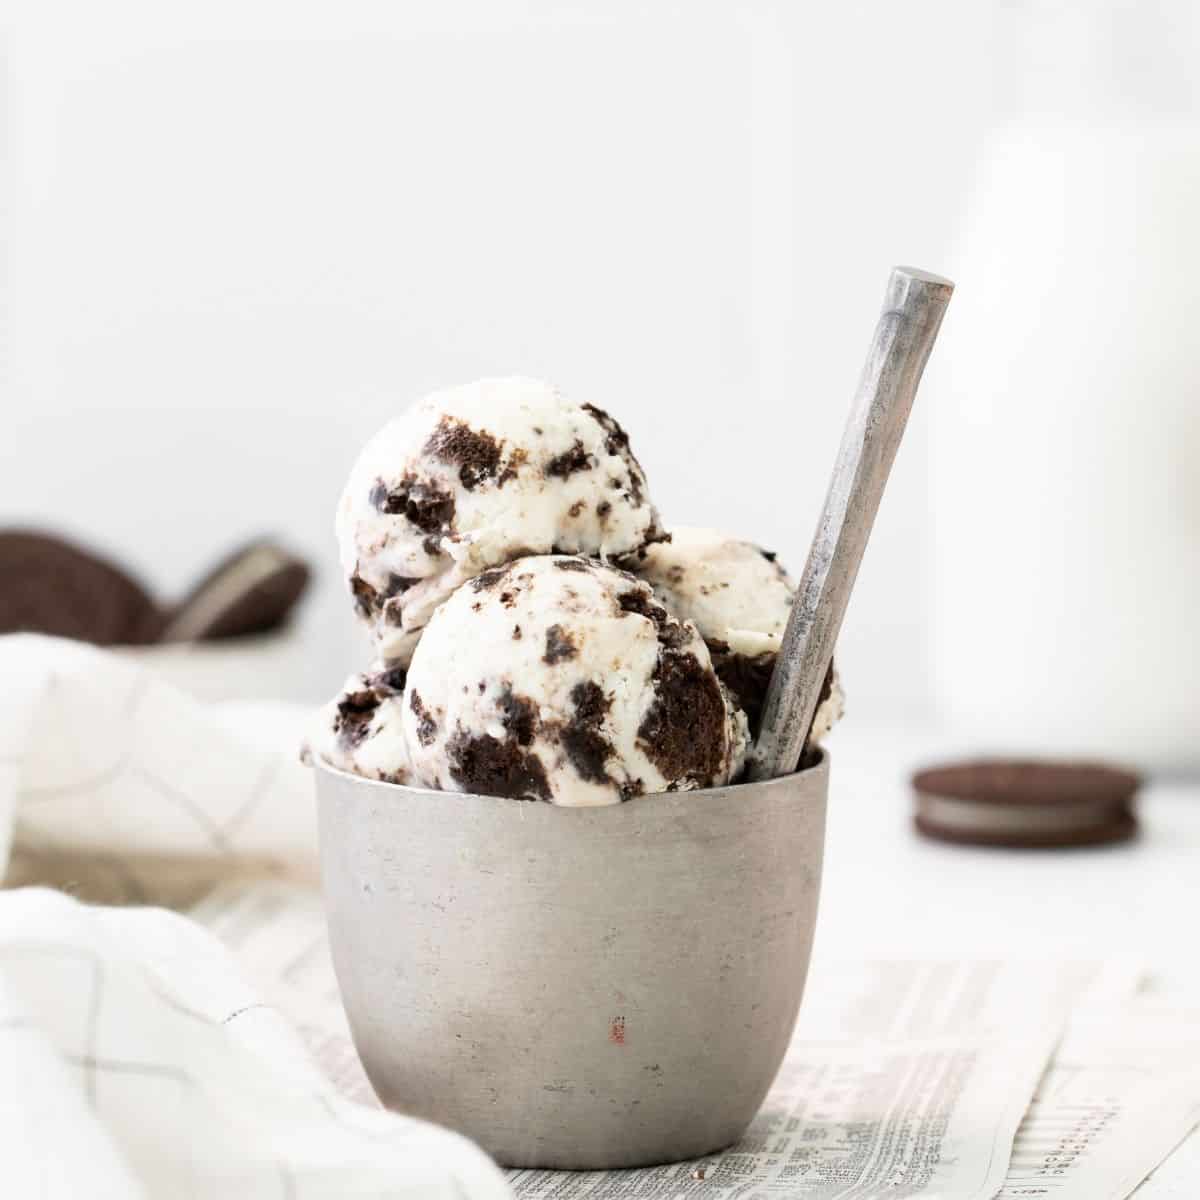 A silver bowl with scoops of cookies and cream ice cream on it.